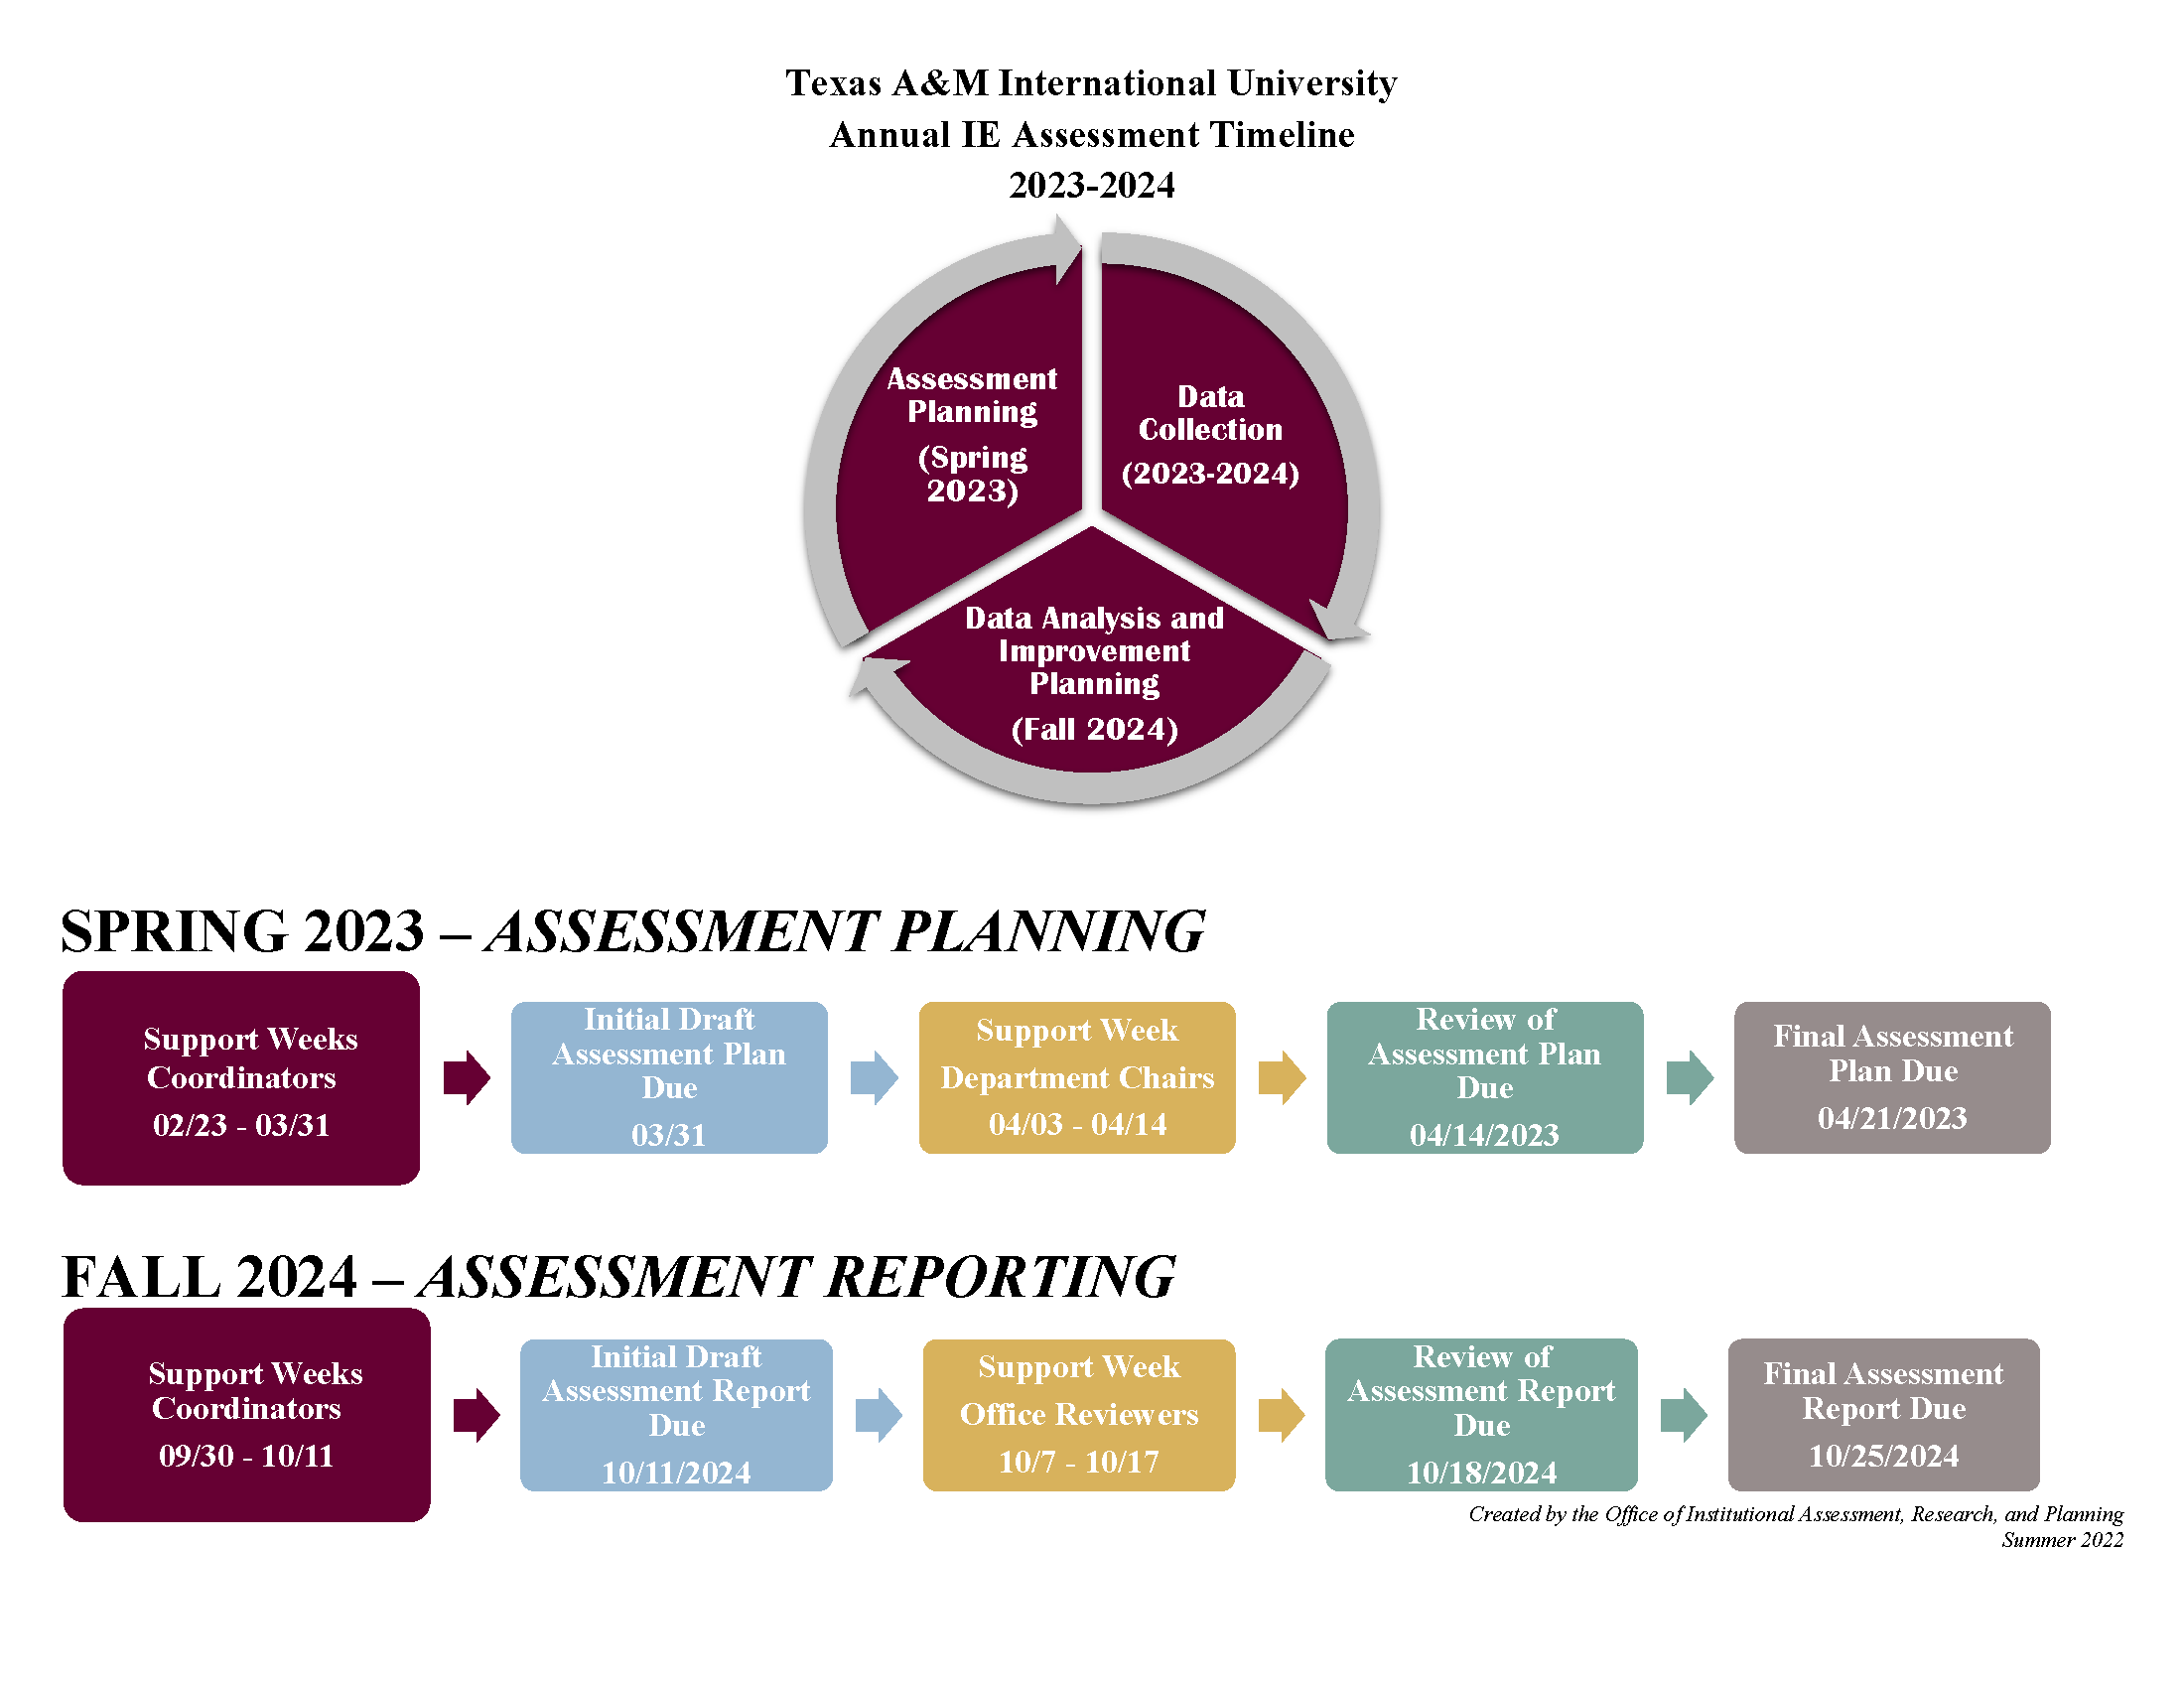 2023-2024 IE Assessment Timeline Pic